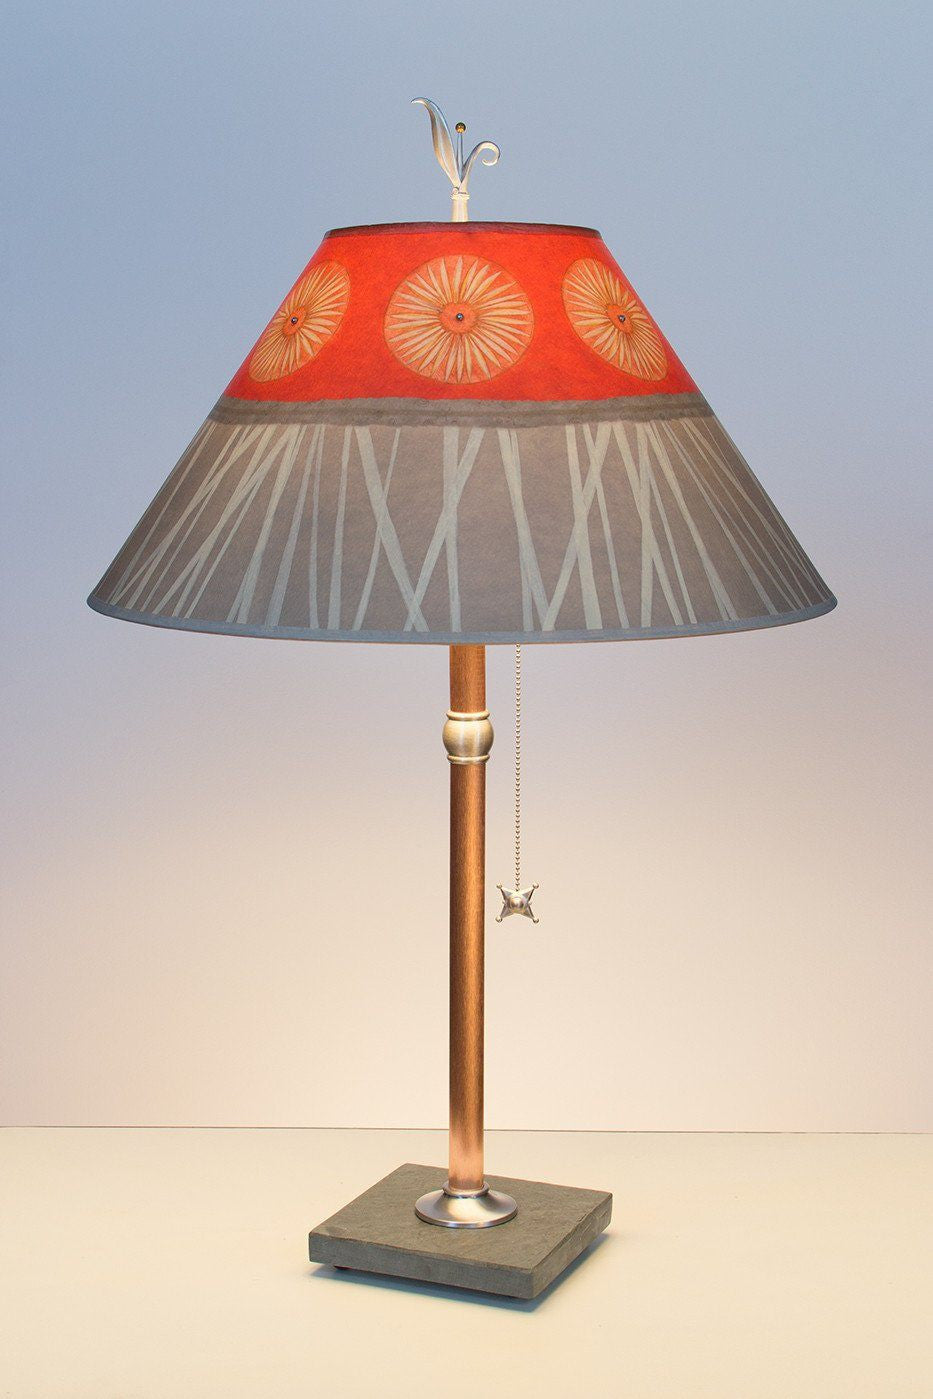 Janna Ugone & Co Table Lamps Copper Table Lamp with Large Conical Shade in Tang